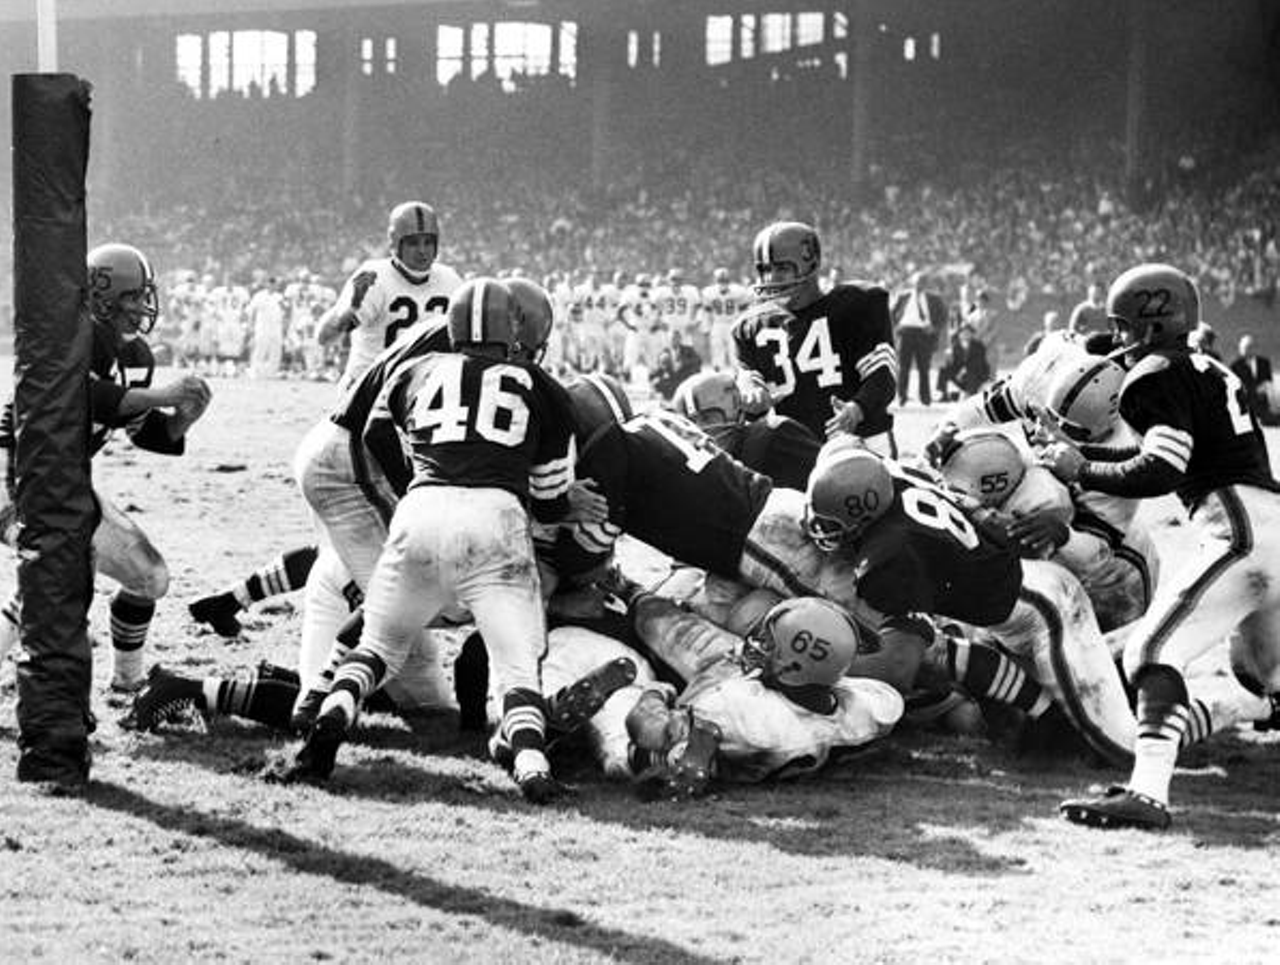 Cleveland Browns vs. Pittsburgh Steelers- 1960
"4th Qtr: Tom Tracy (can't be seen) is stopped by whole Browns line short of TD. Browns held Pitt on next play. This was a key stop for the Browns defense."